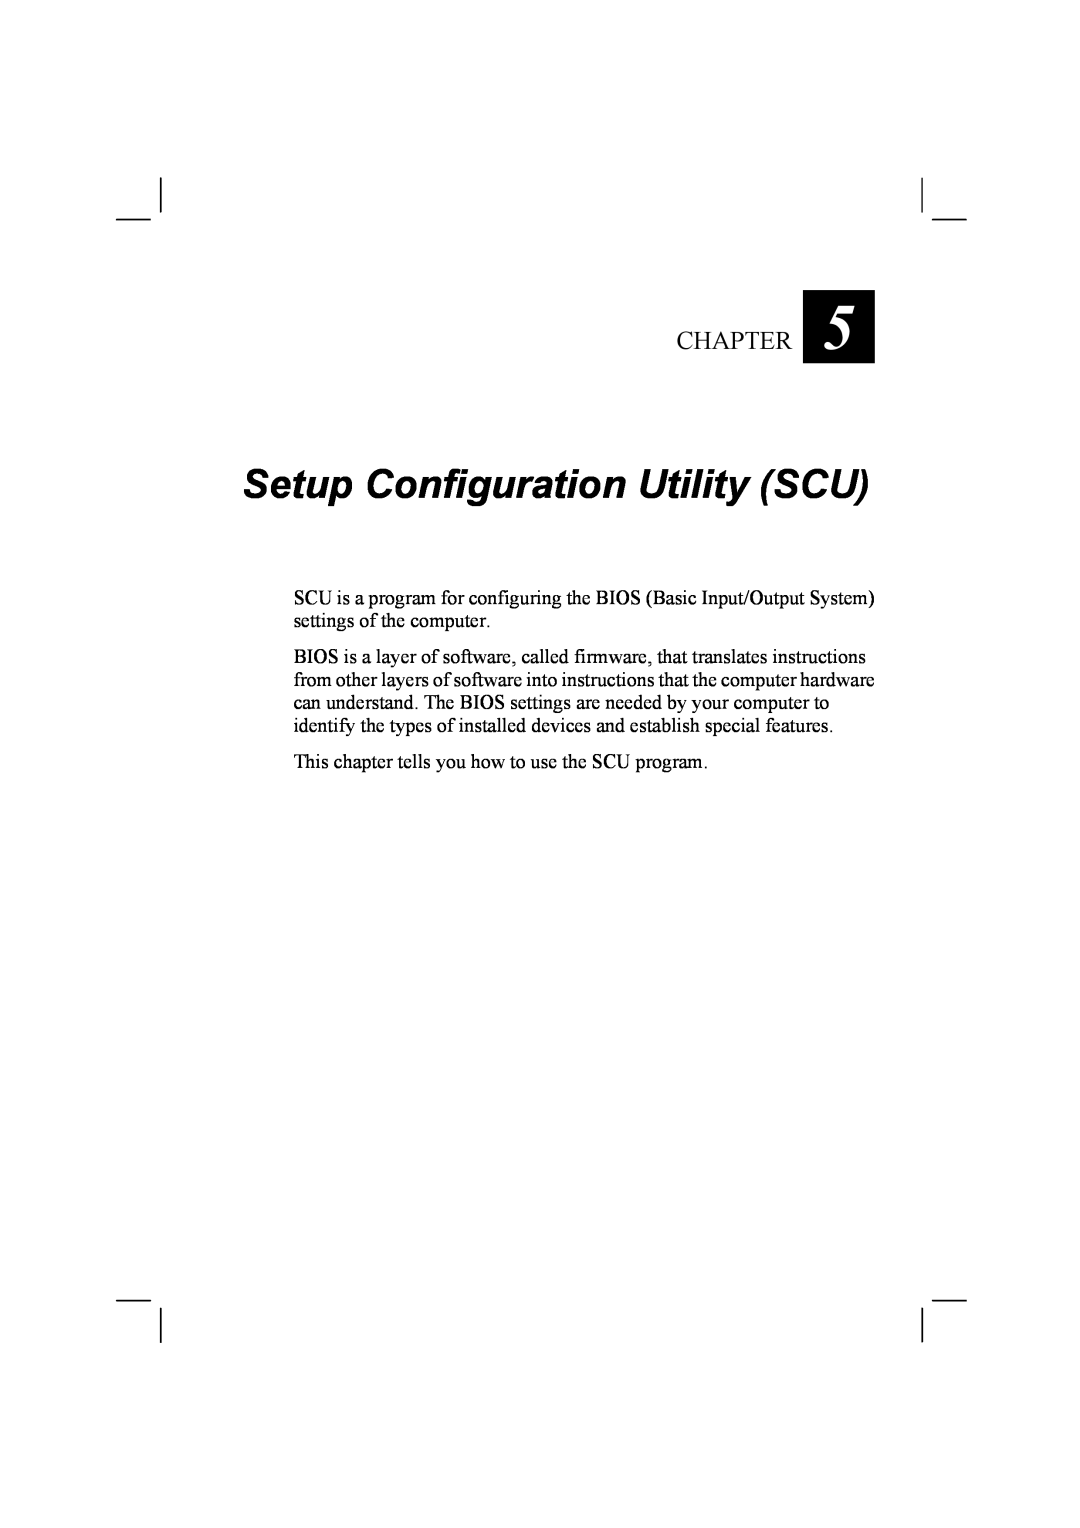 TAG 20 Series manual Setup Configuration Utility SCU, Chapter, This chapter tells you how to use the SCU program 